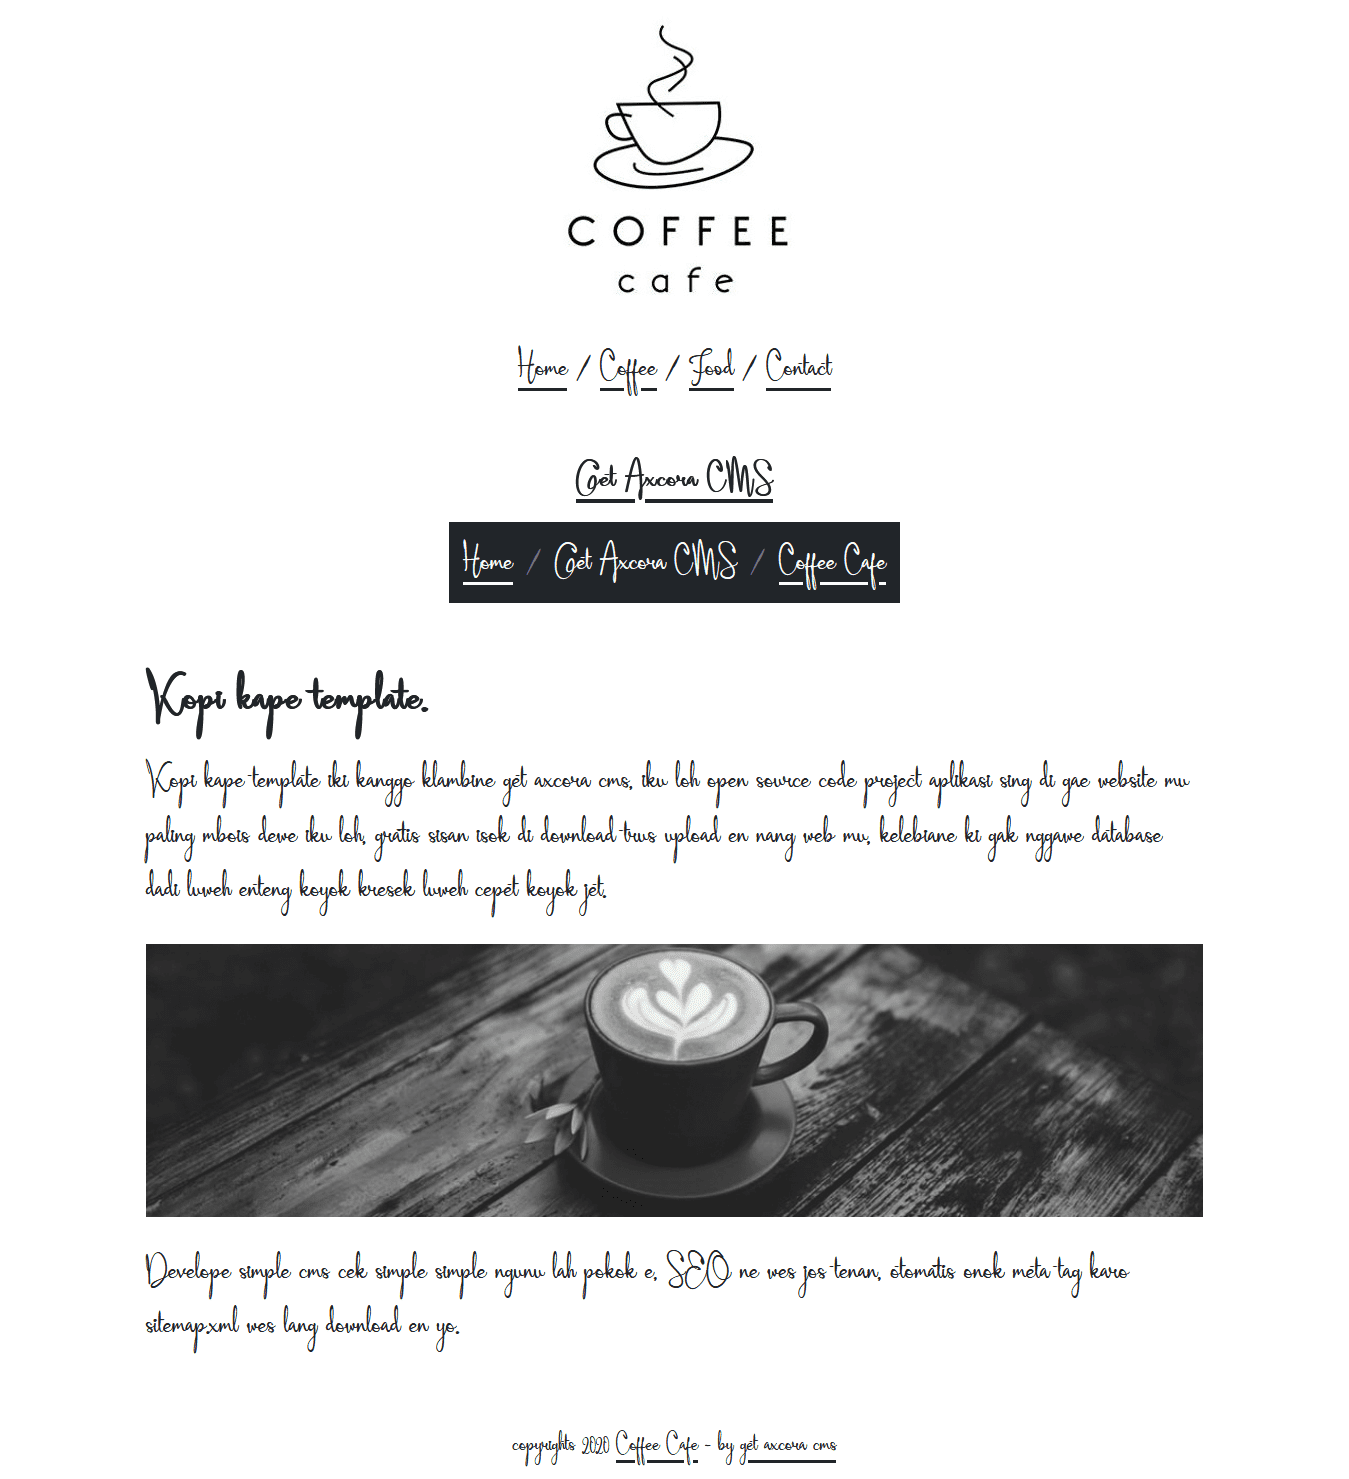 website cafe coffee shop template themes